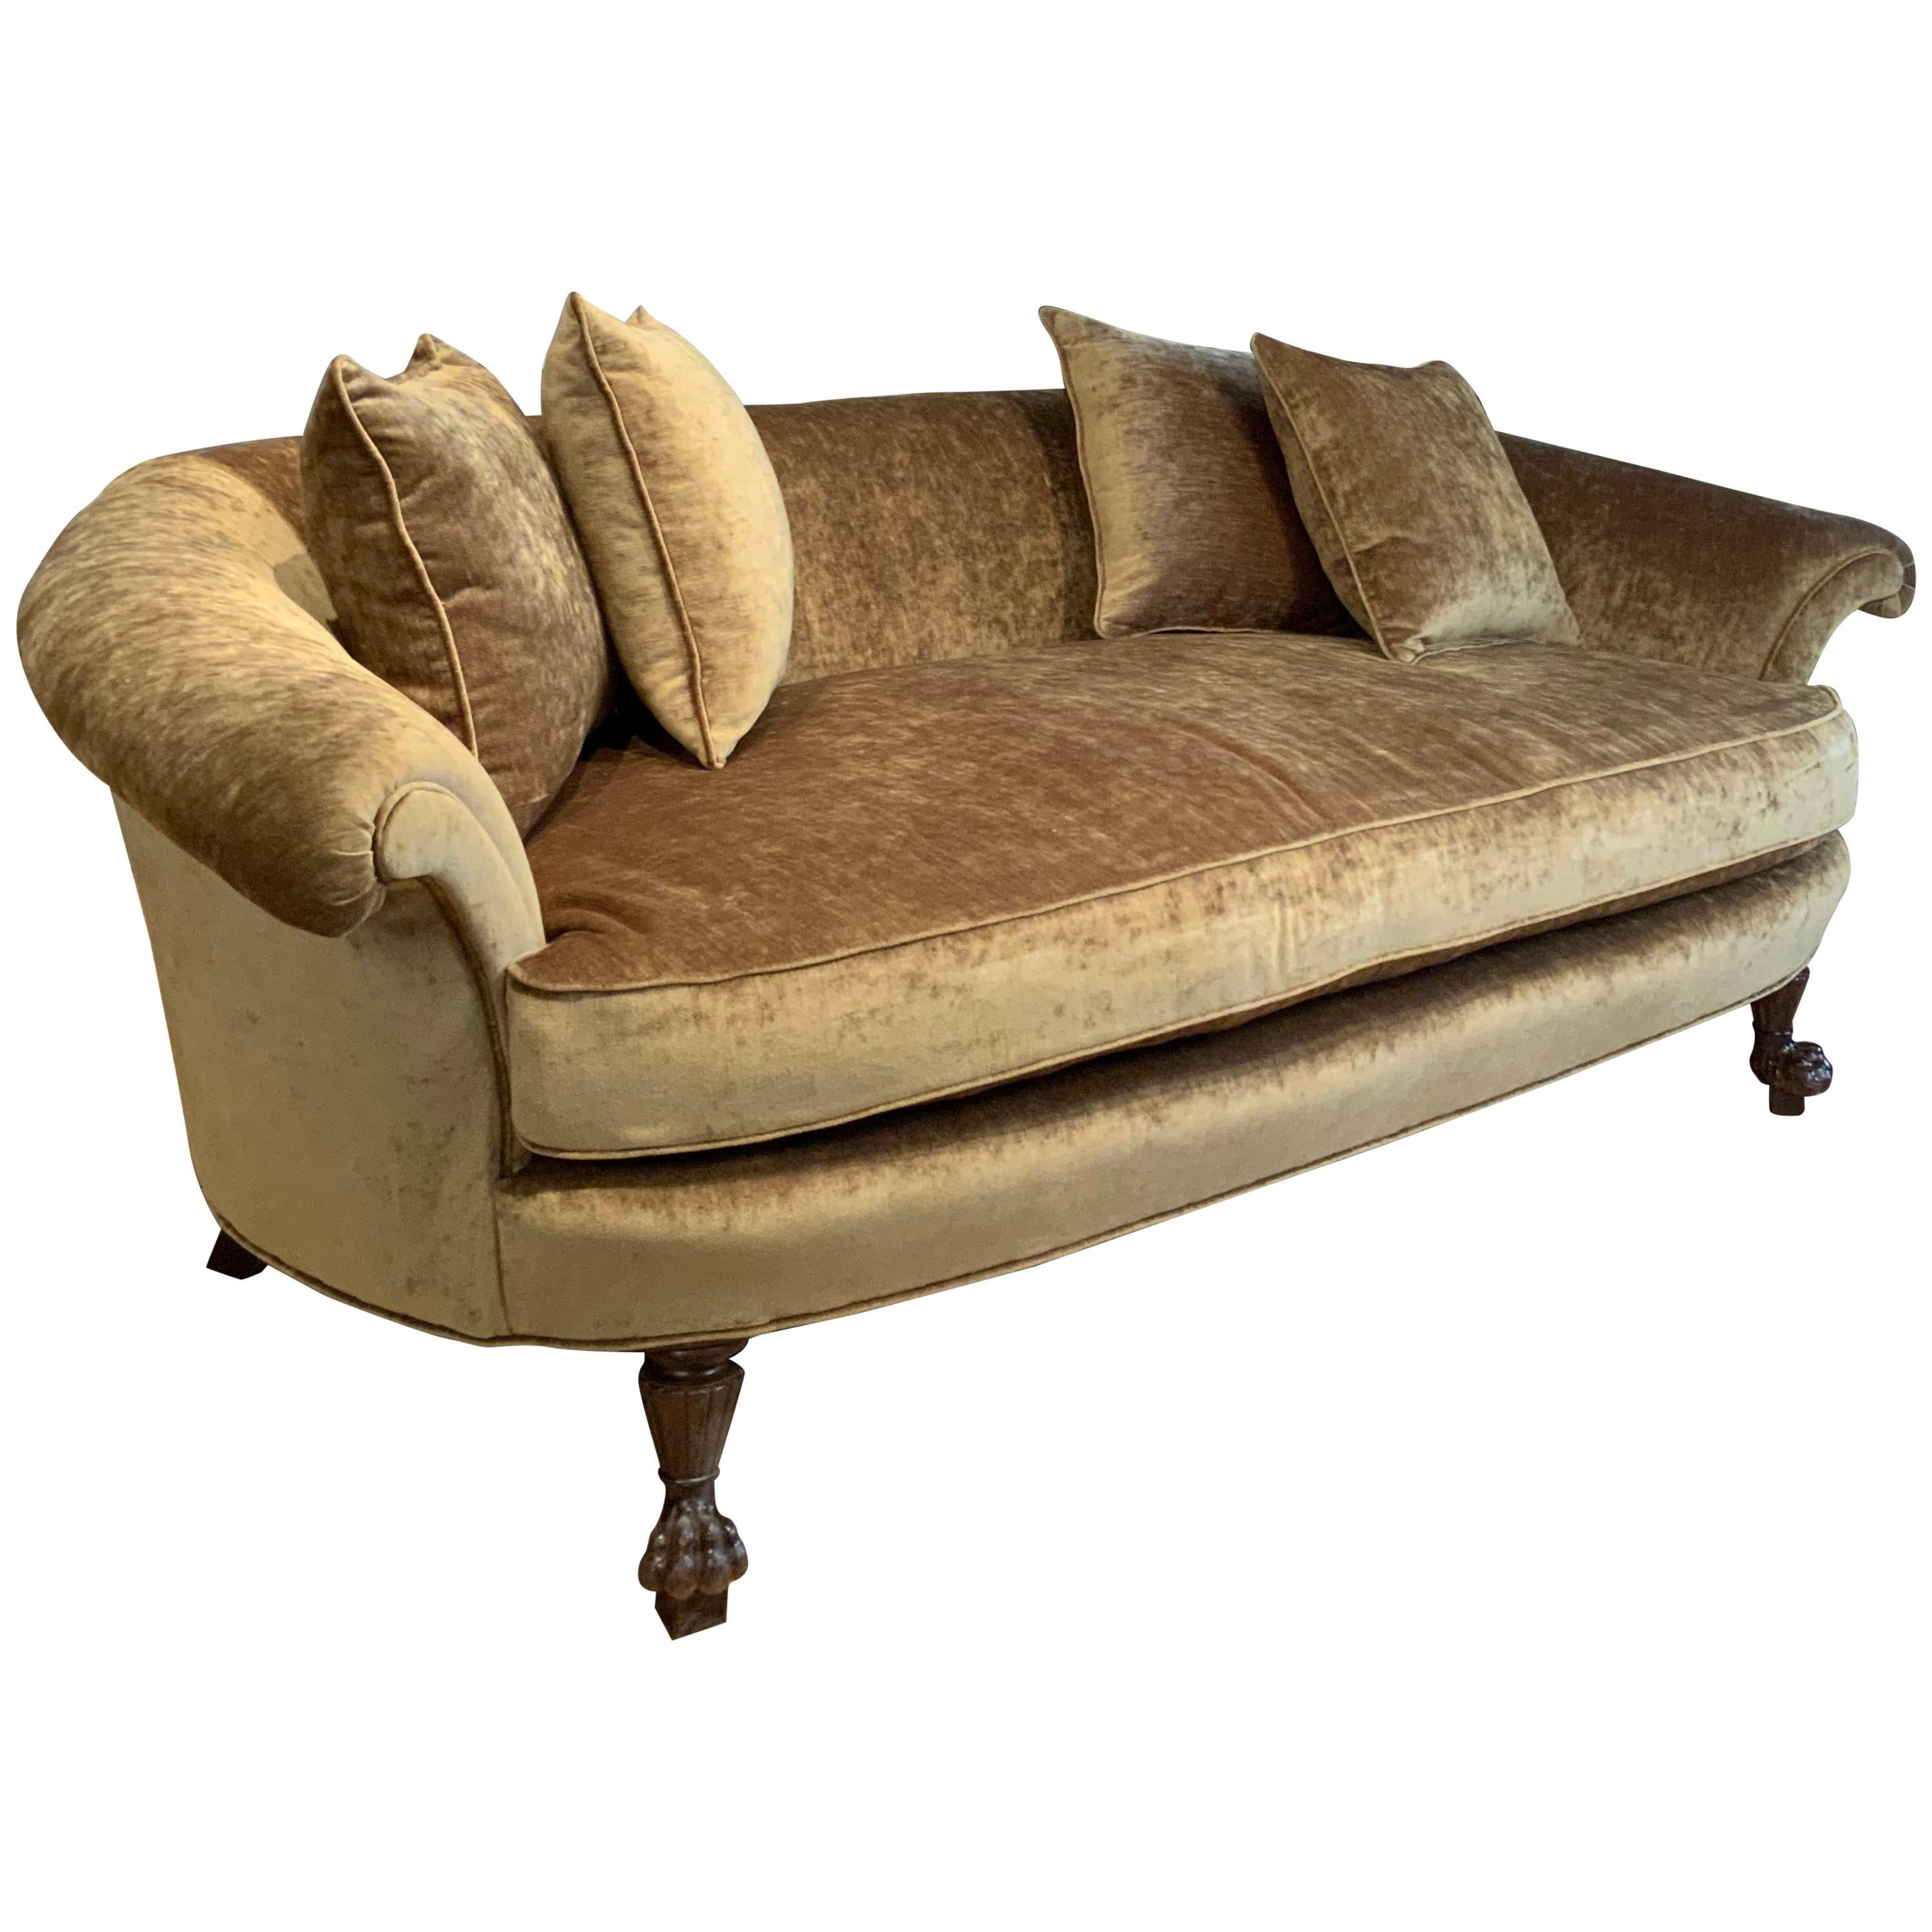 A beautiful and very comfortable antique 1940s sofa with a large gracious curved back, and loose pillows. Wonderful scale and proportions, this sofa was just freshly reupholstered in a beautiful beige/gold velvet. Luxurious fabric and great subtle